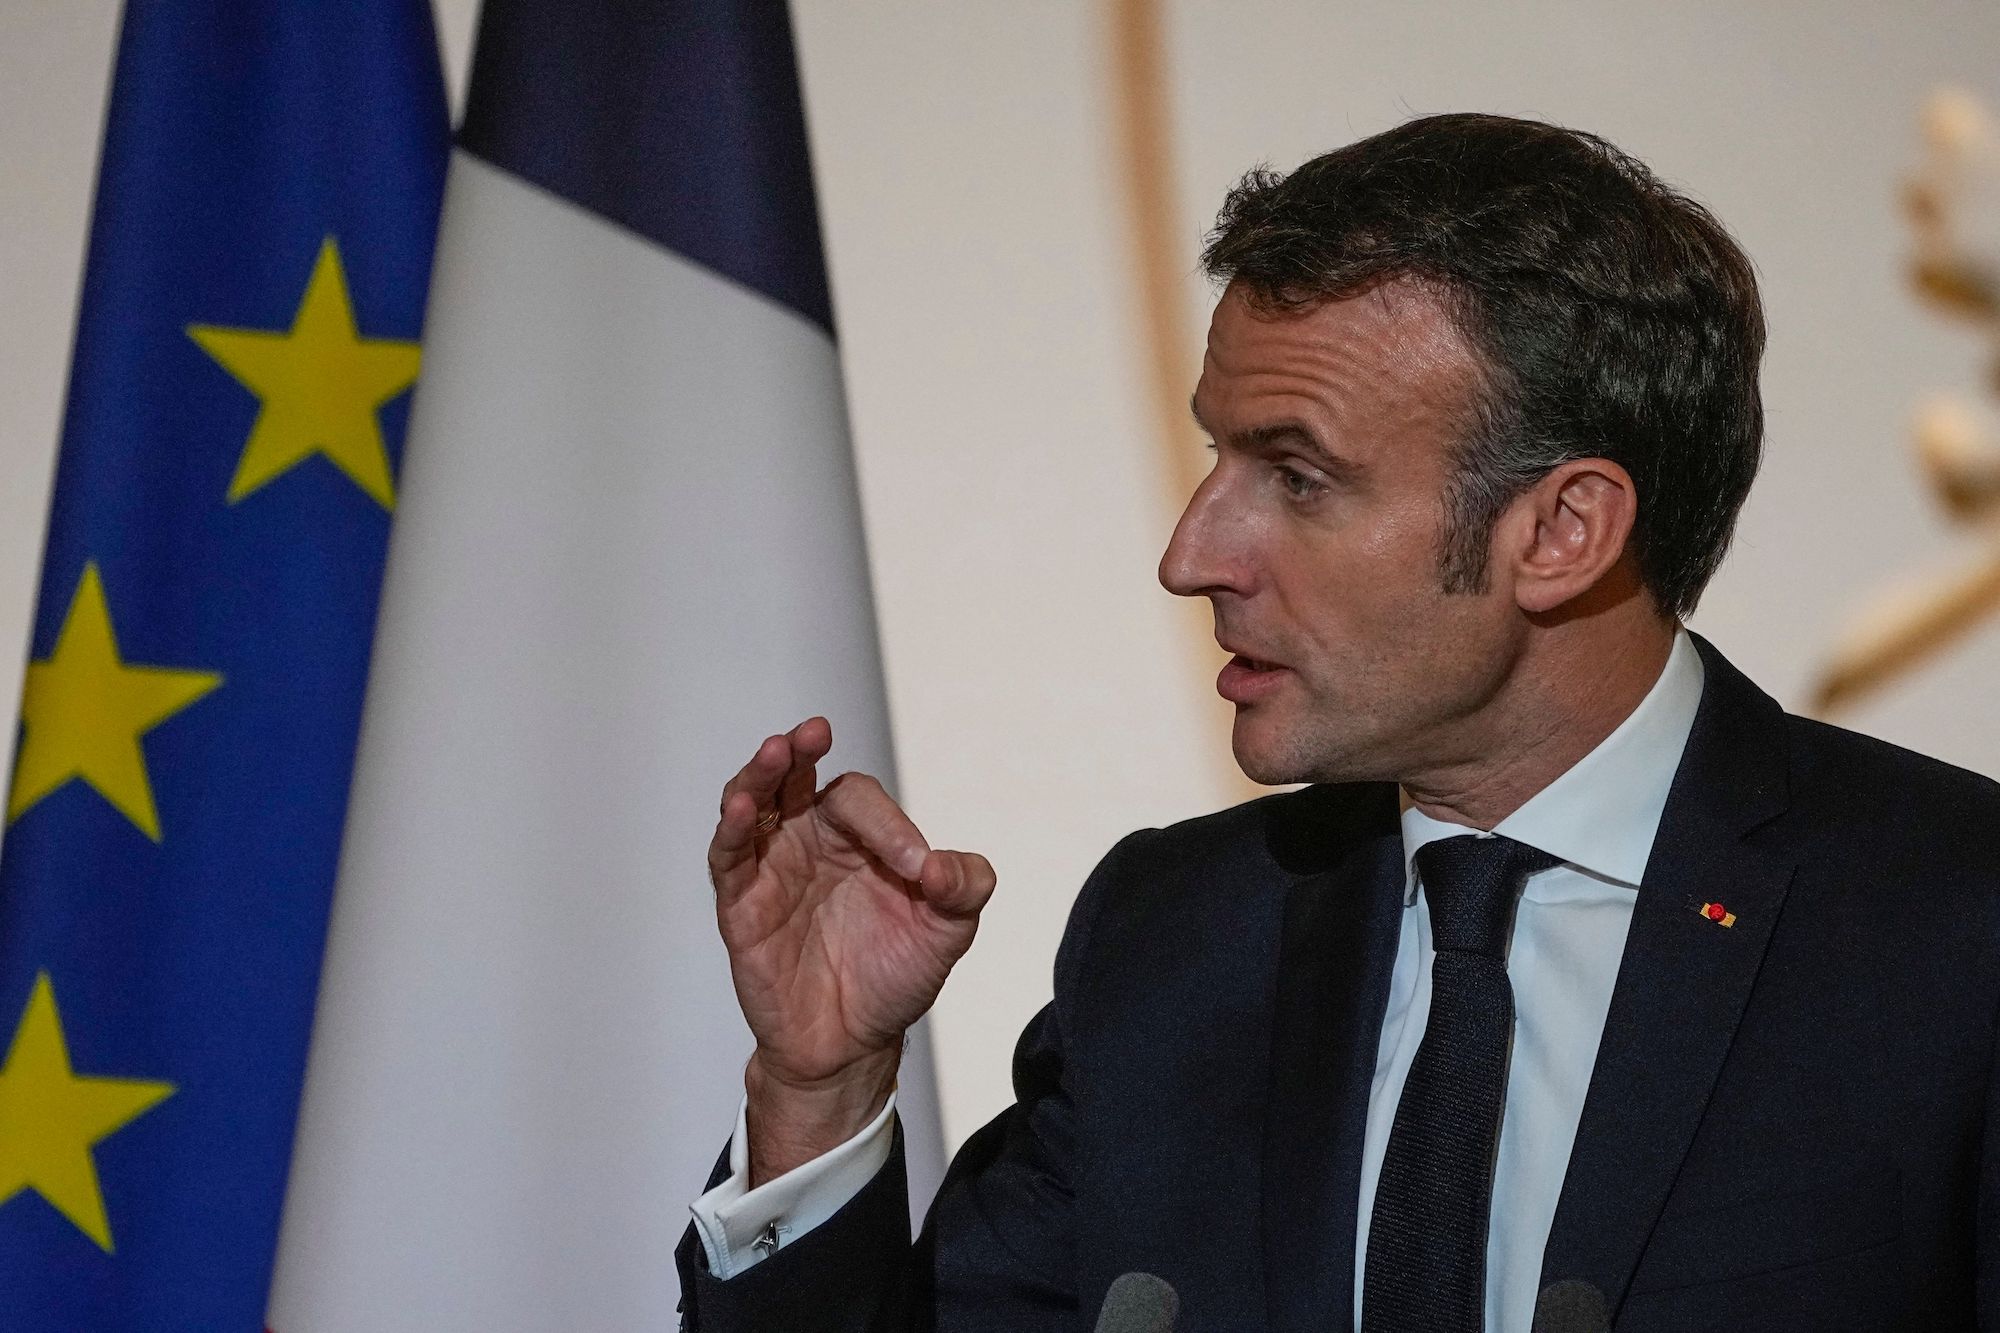 French President Emmanuel Macron delivers a speech at a reception for the mayors of France in Paris on Wednesday.